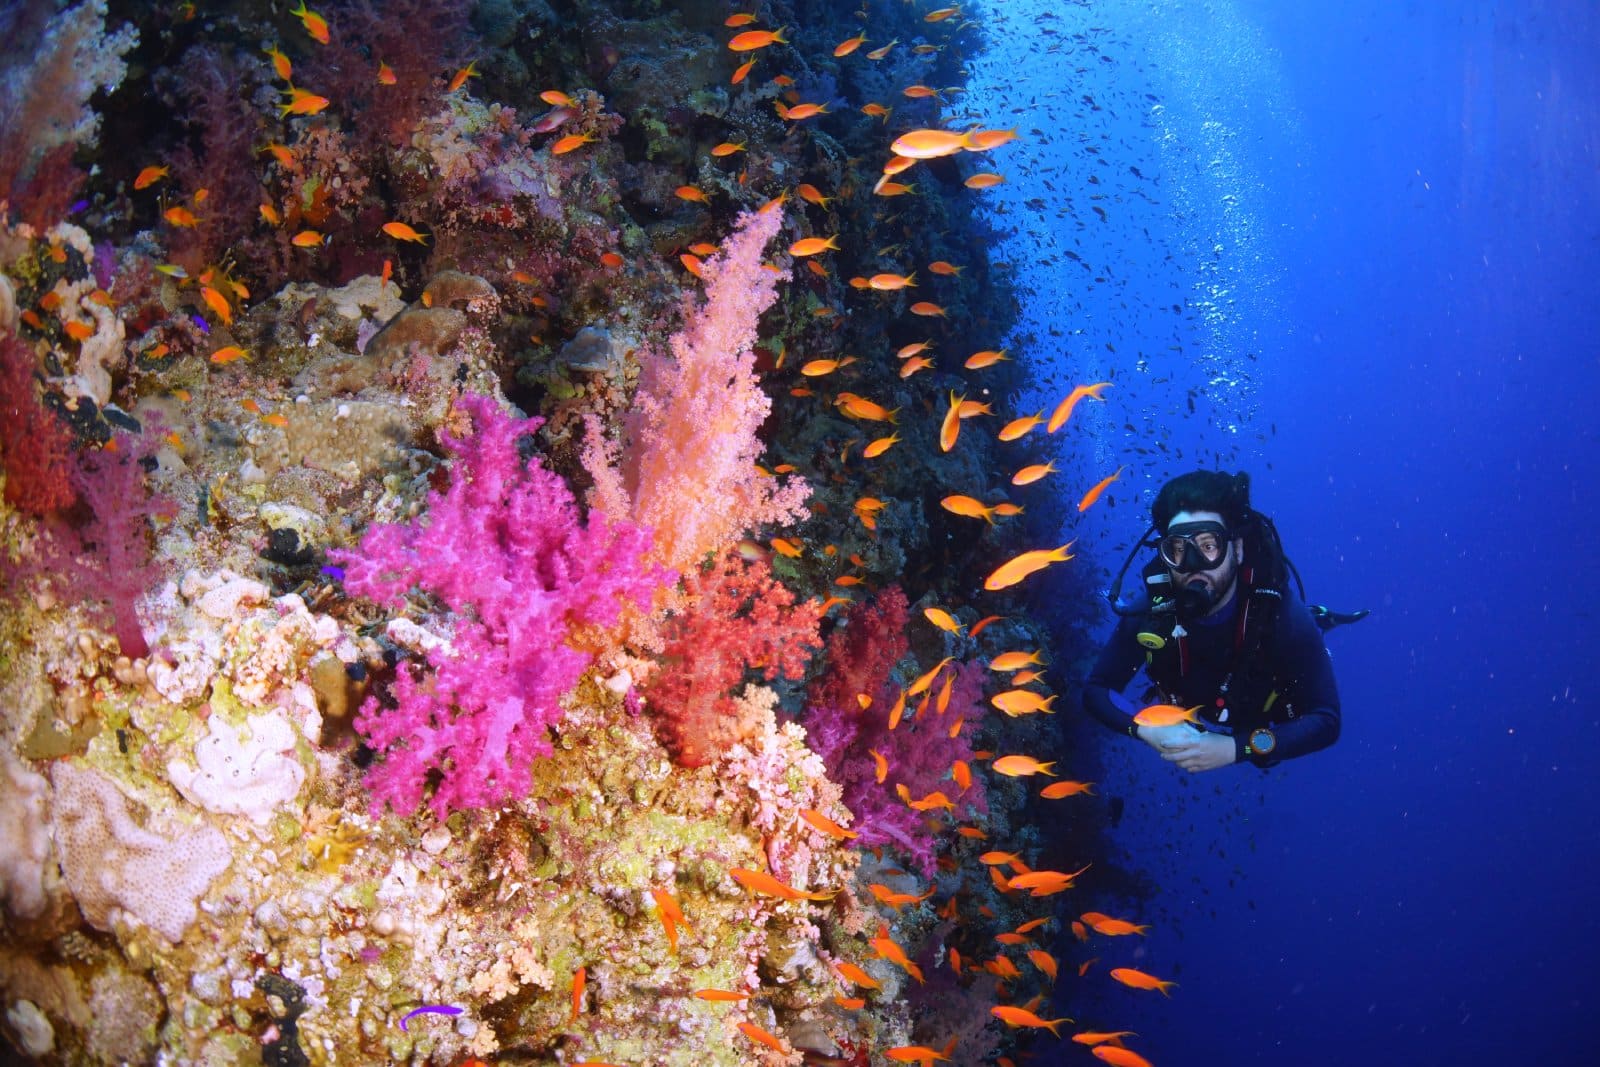 <p class="wp-caption-text">Image Credit: Shutterstock / Cinzia Osele</p>  <p><span>Egypt’s Red Sea Riviera is a haven for divers, snorkelers, and sun-seekers, known for its crystal-clear waters, vibrant coral reefs, and year-round sunshine. Resorts like Sharm El Sheikh, Hurghada, and Marsa Alam are gateways to underwater wonders, including the famous Thistlegorm wreck and the Ras Mohammed National Park. The Red Sea’s marine biodiversity is unparalleled, with opportunities to spot dolphins, turtles, and hundreds of fish species. Beyond the beach, the Red Sea Riviera offers adventures in the desert, including safaris and Bedouin dinners under the stars. The region’s commitment to conservation ensures that its natural beauty is preserved for future generations, making it a sustainable choice for eco-conscious travelers.</span></p>